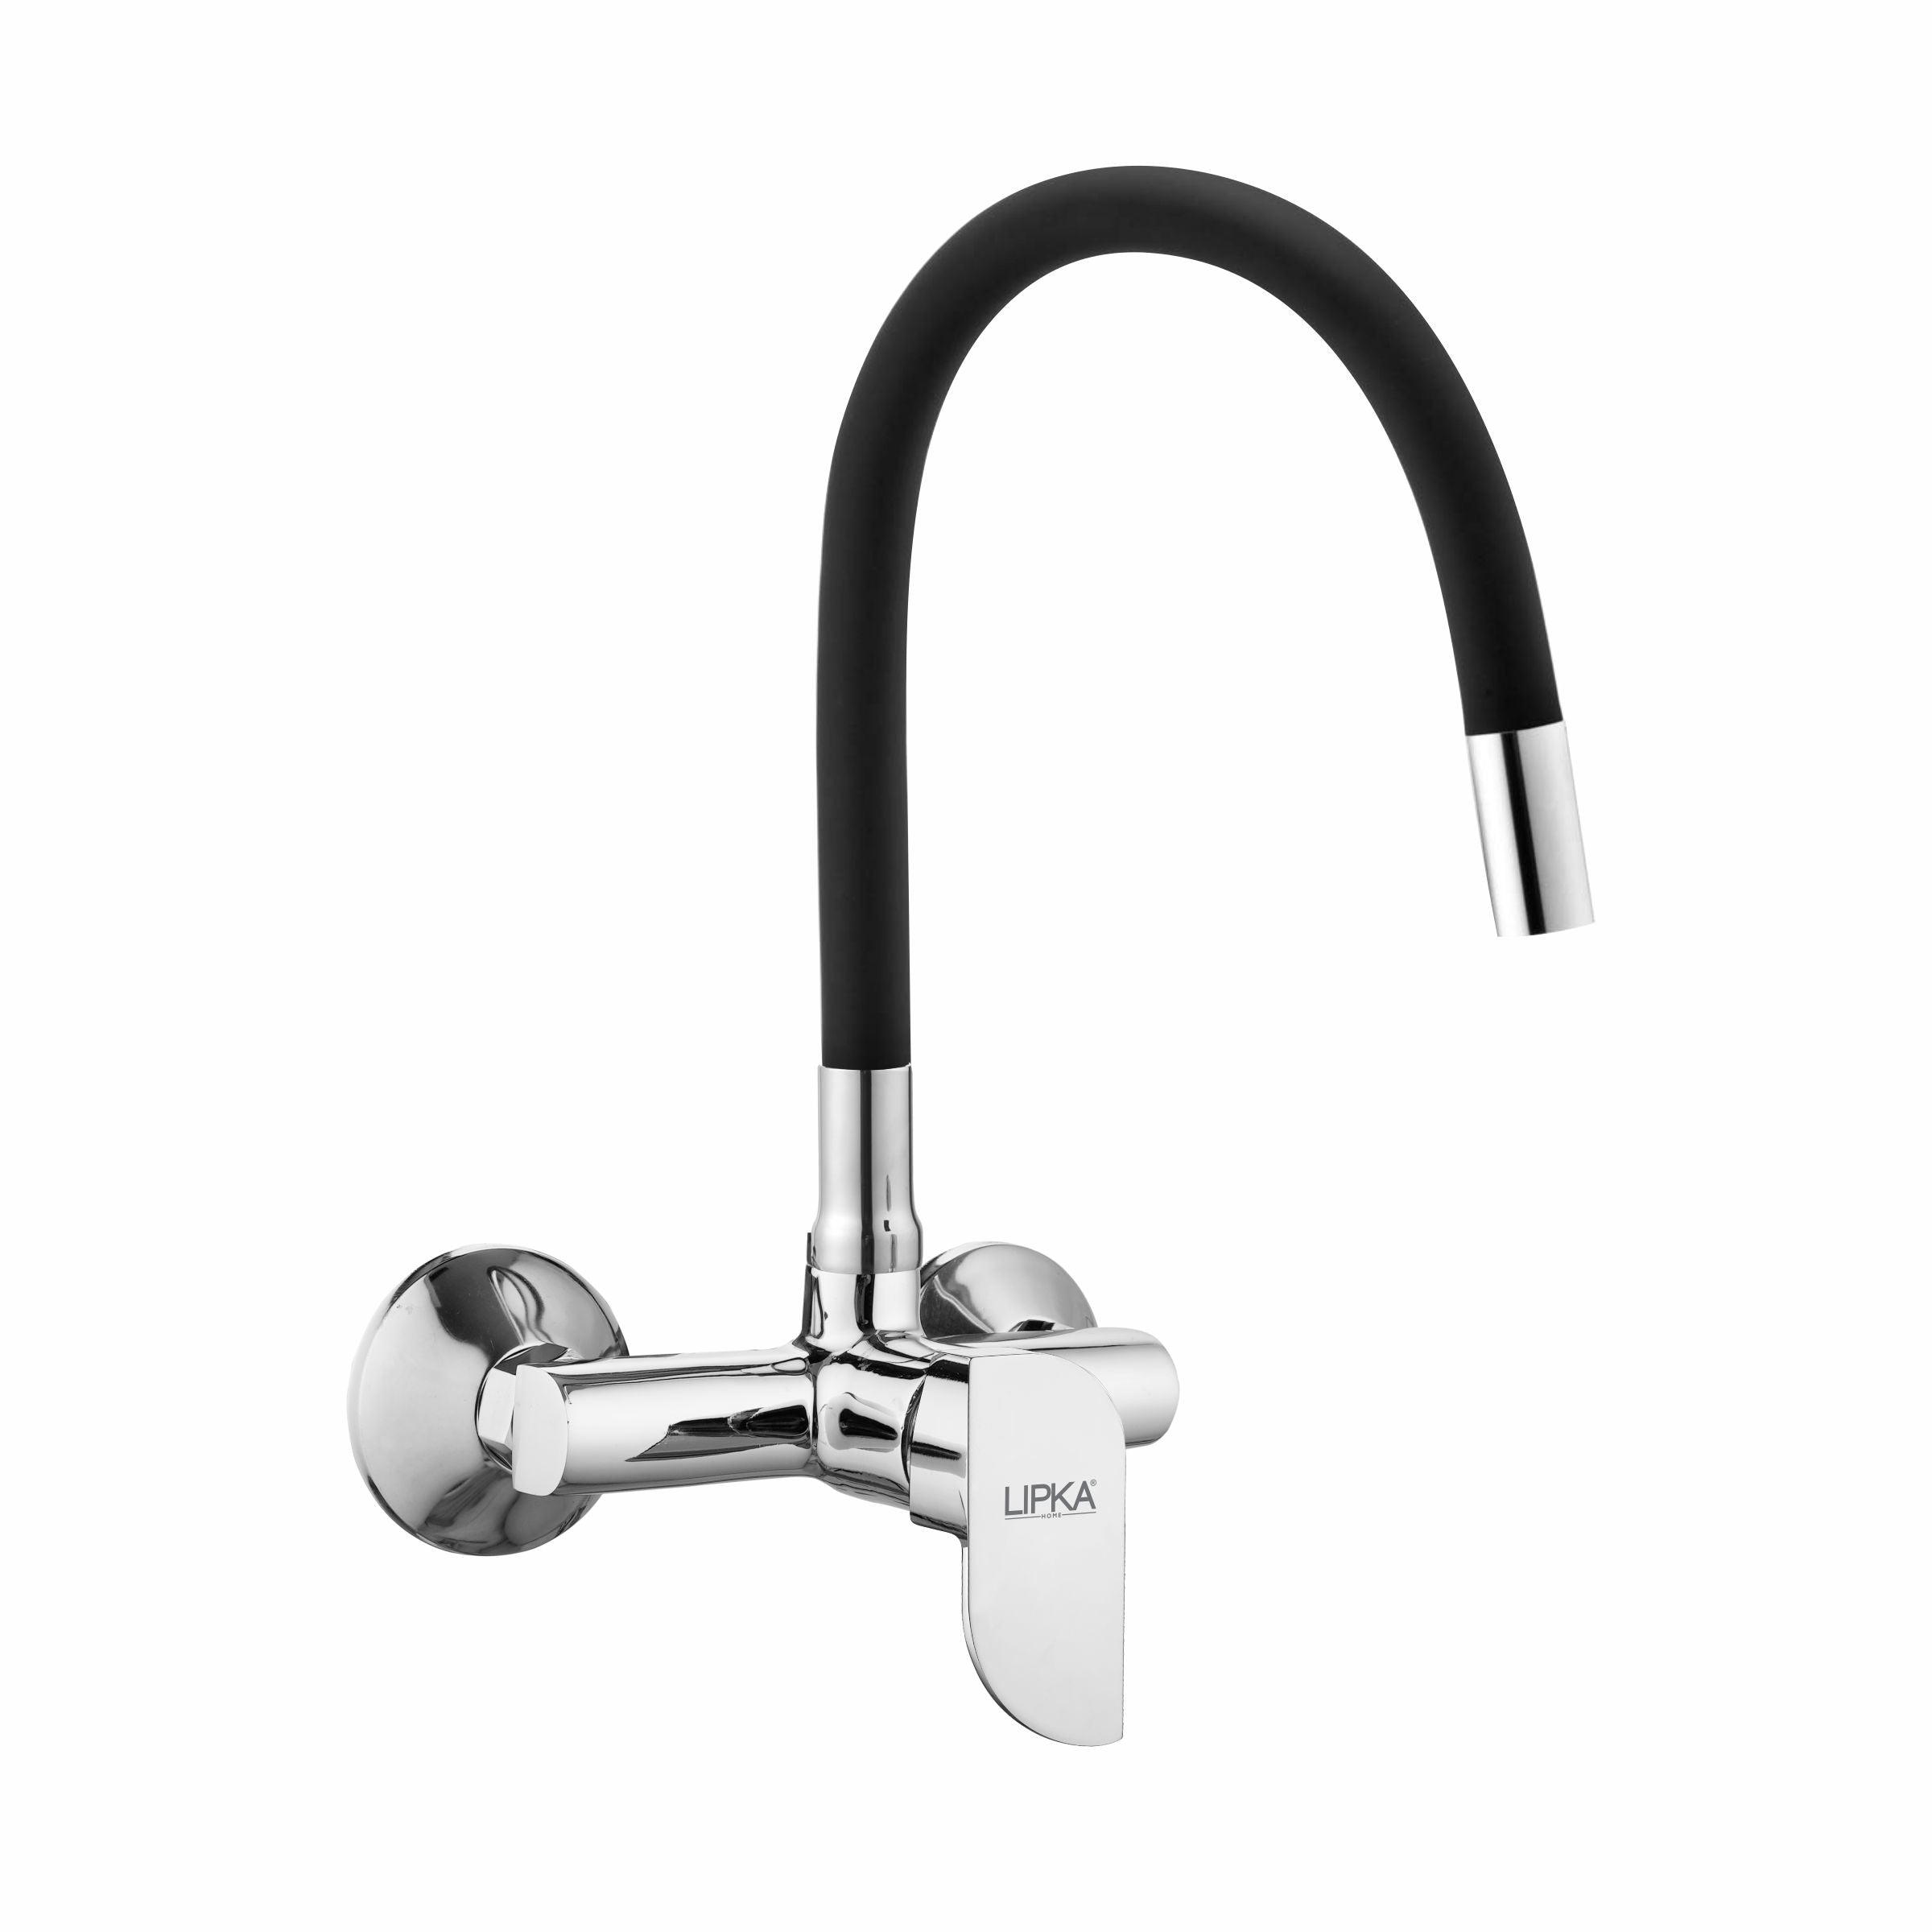 Arise Single Lever Sink Mixer with Black Flexible Silicone Spout (20 Inches) - LIPKA - Lipka Home